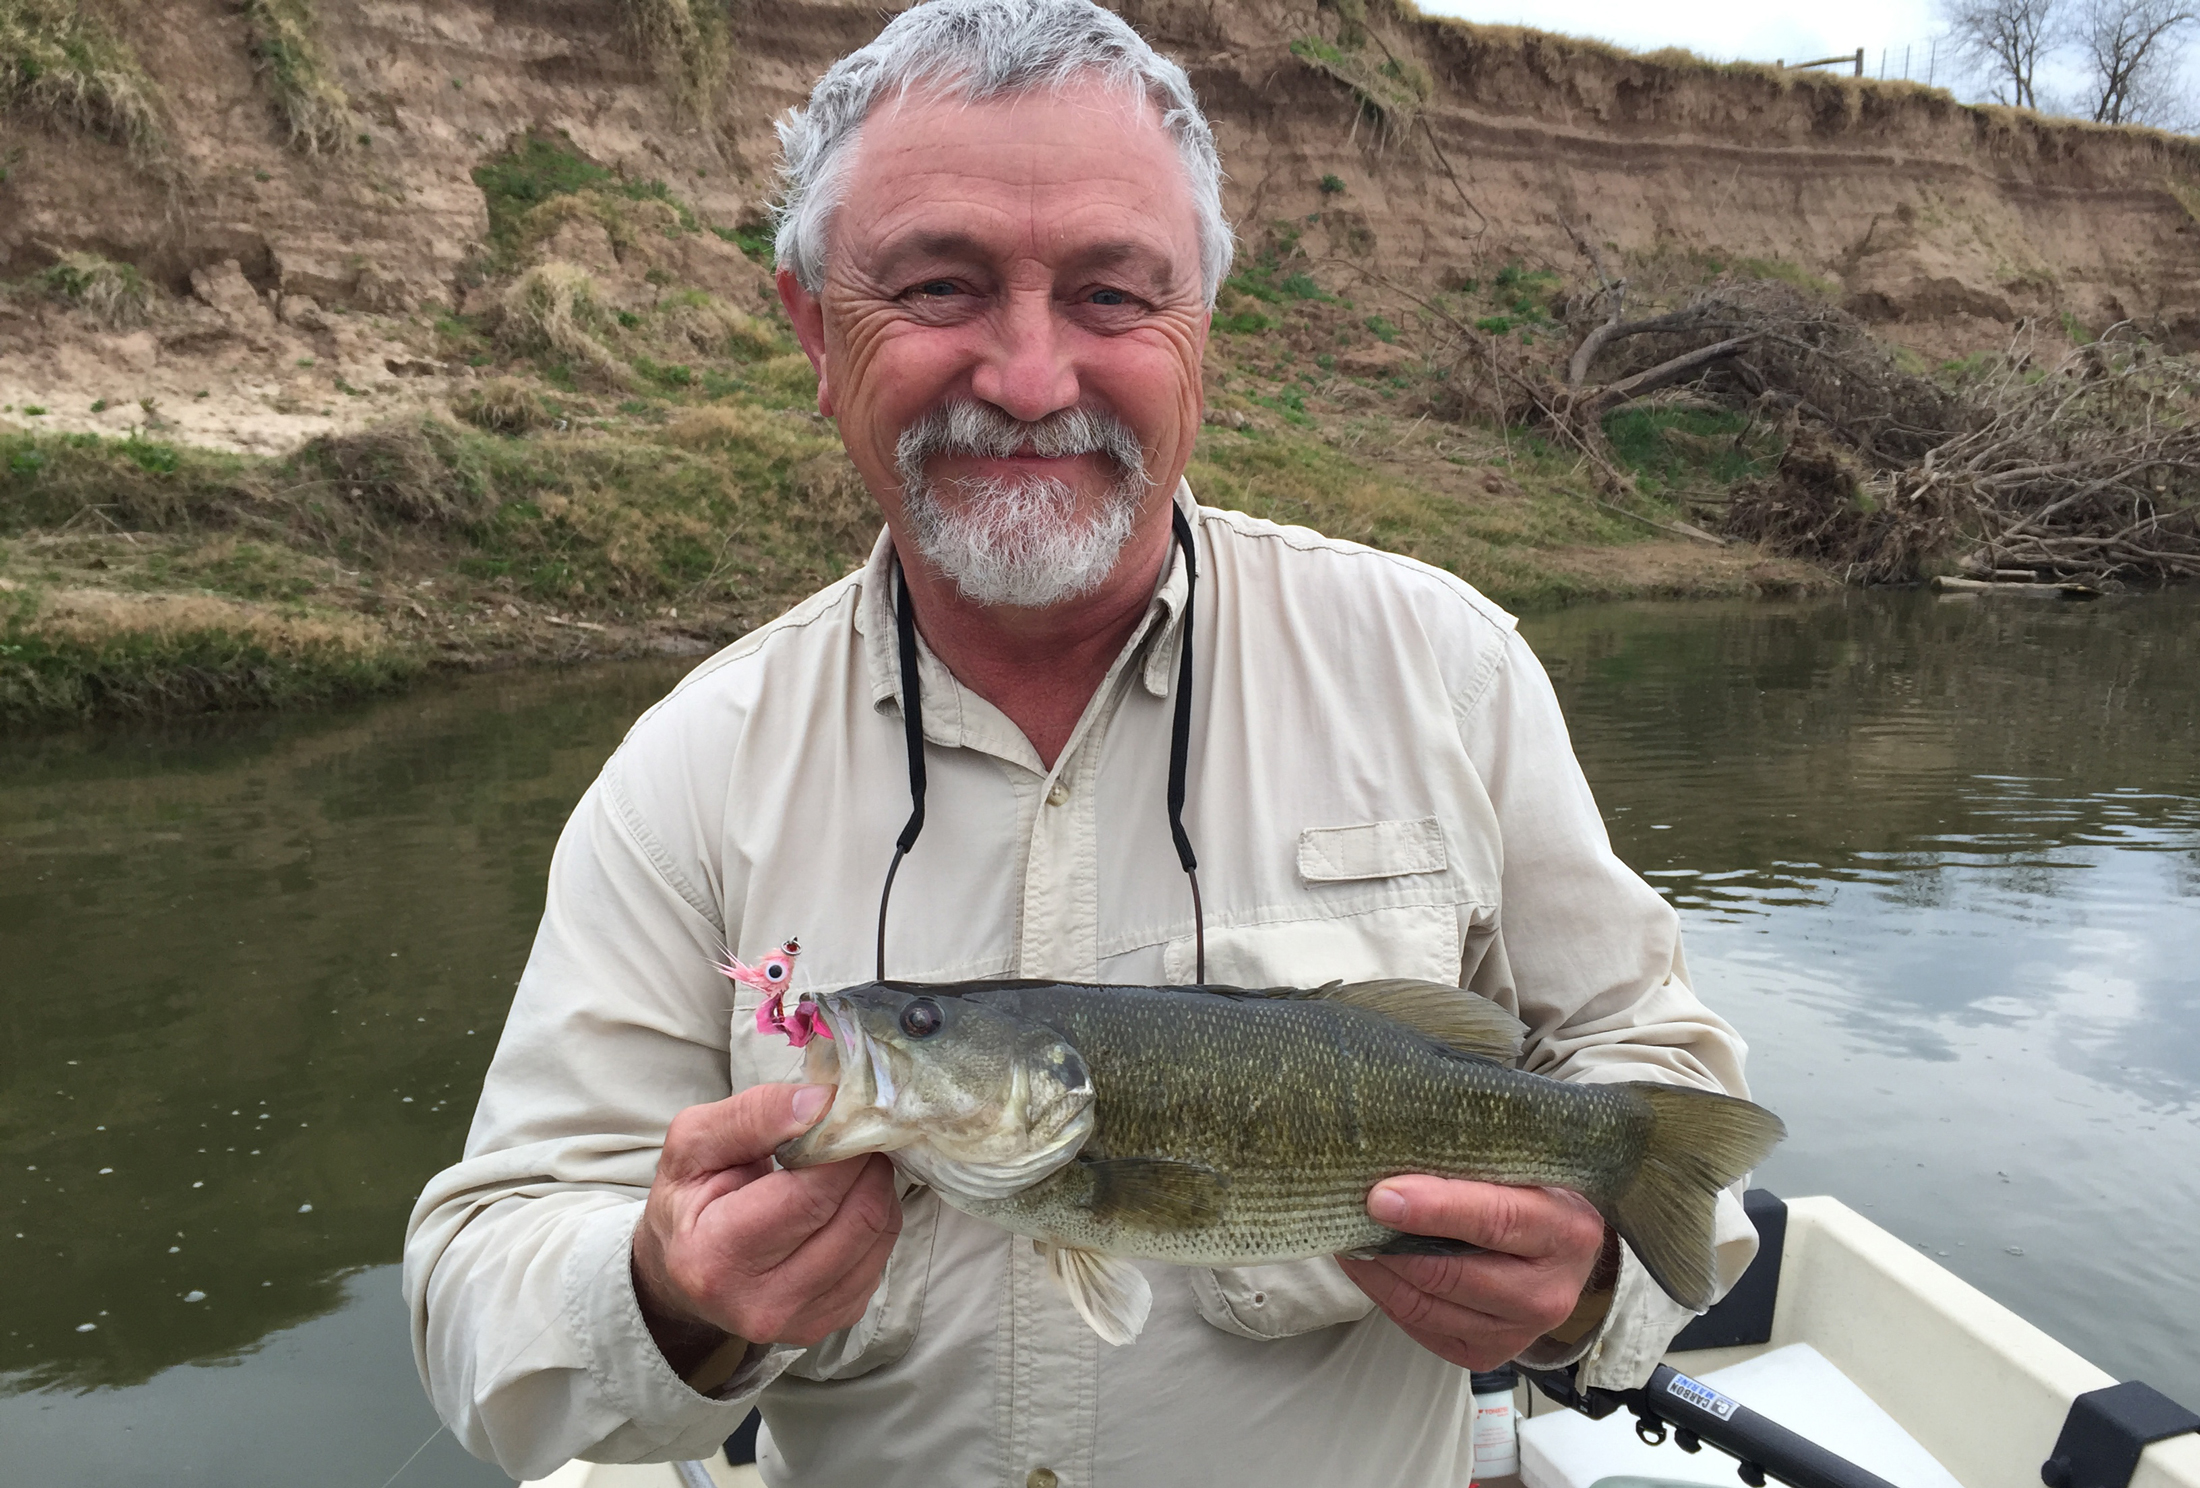 The Conservancy's John Karges with a Guadalupe bass. Photo © The Nature Conservancy (Matt Miller)